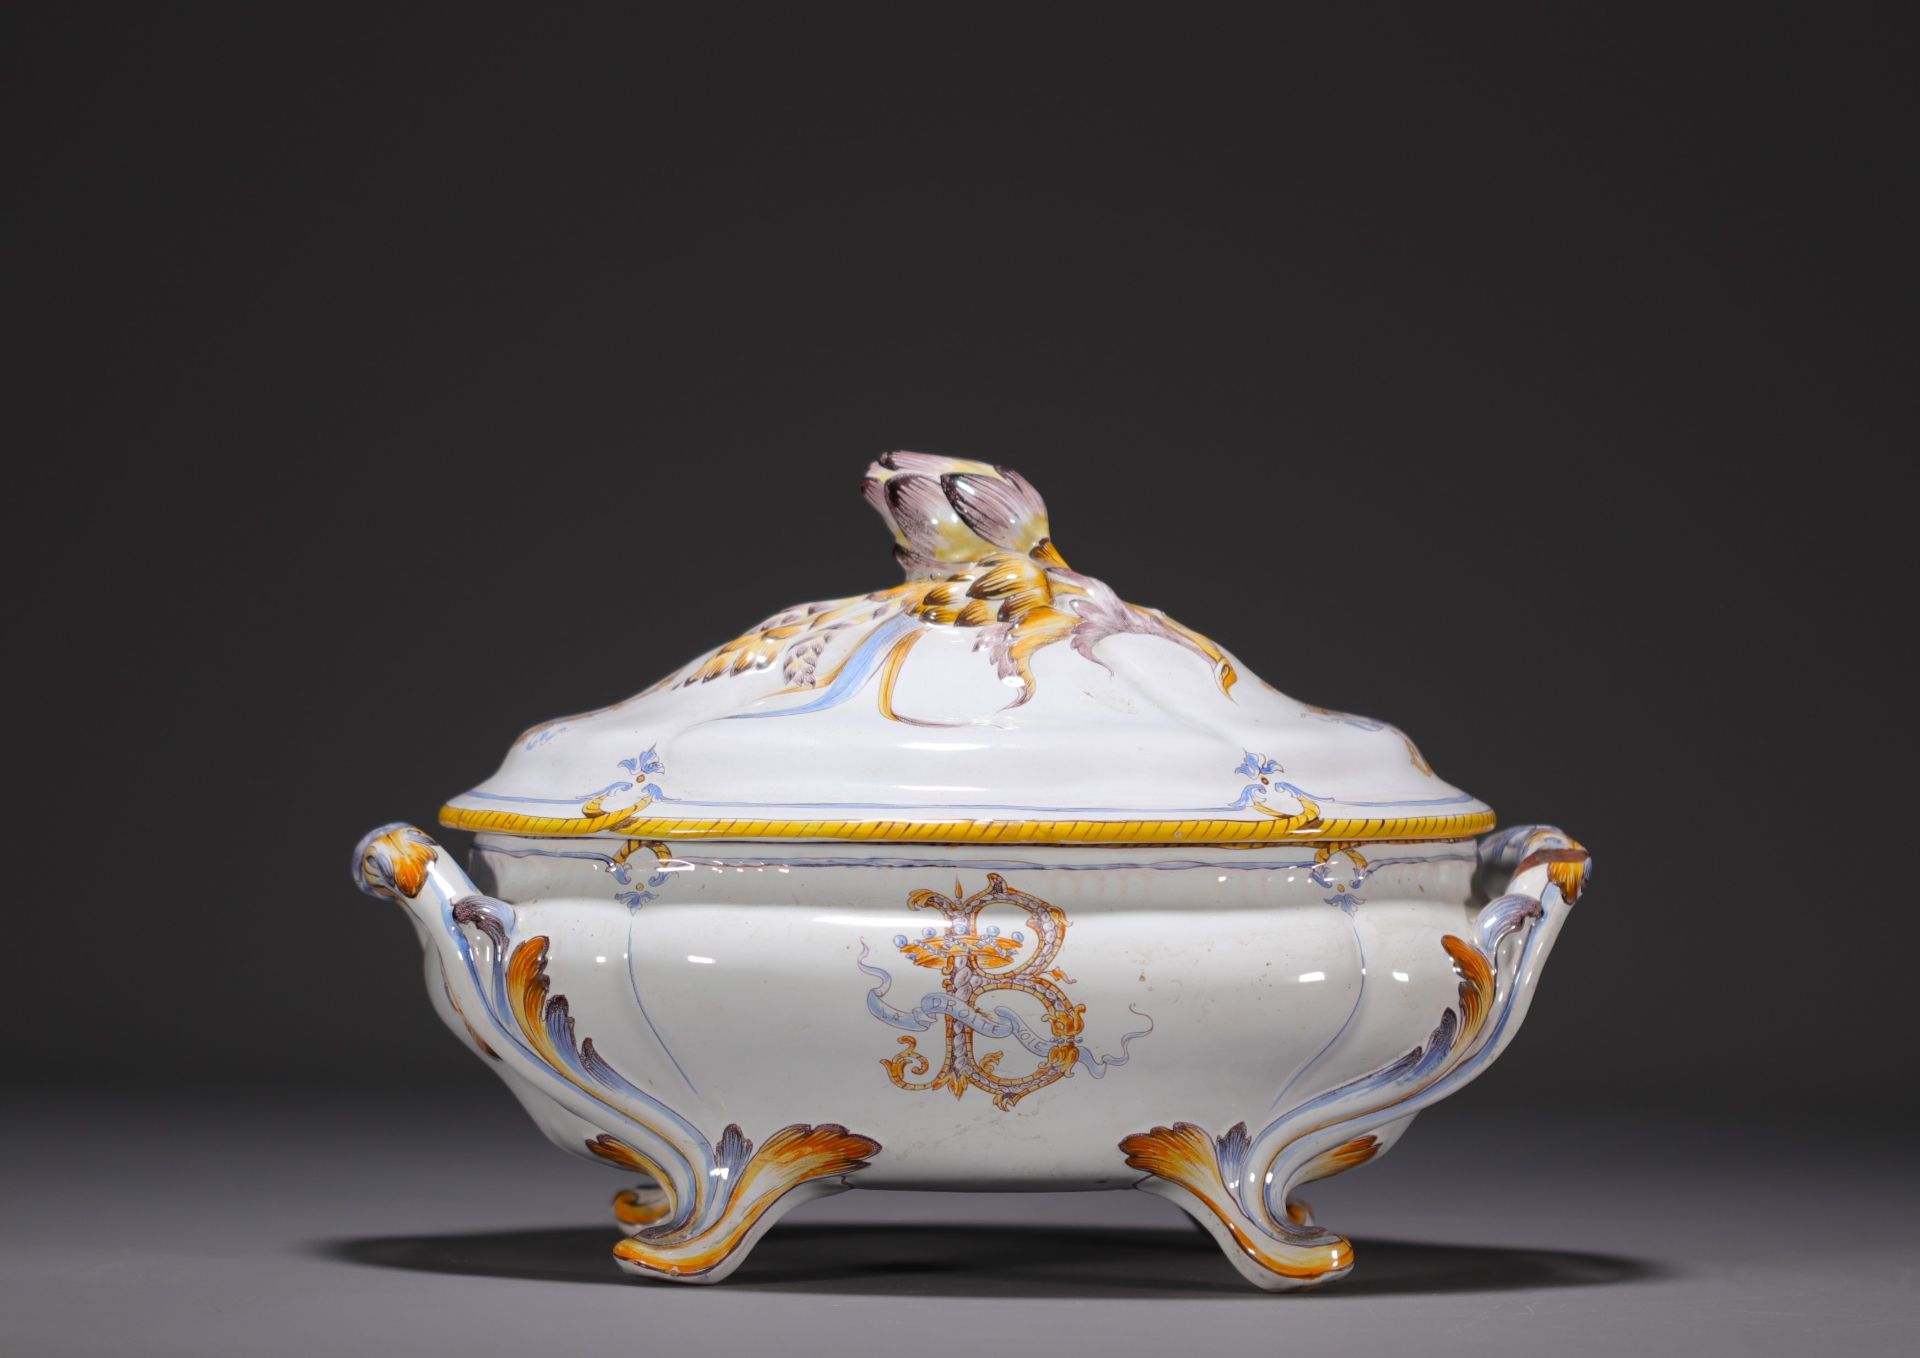 Emile GALLE (1846-1904) Ceramic tureen and tray "La Droite Voie" (The Straight Way) - Image 3 of 5